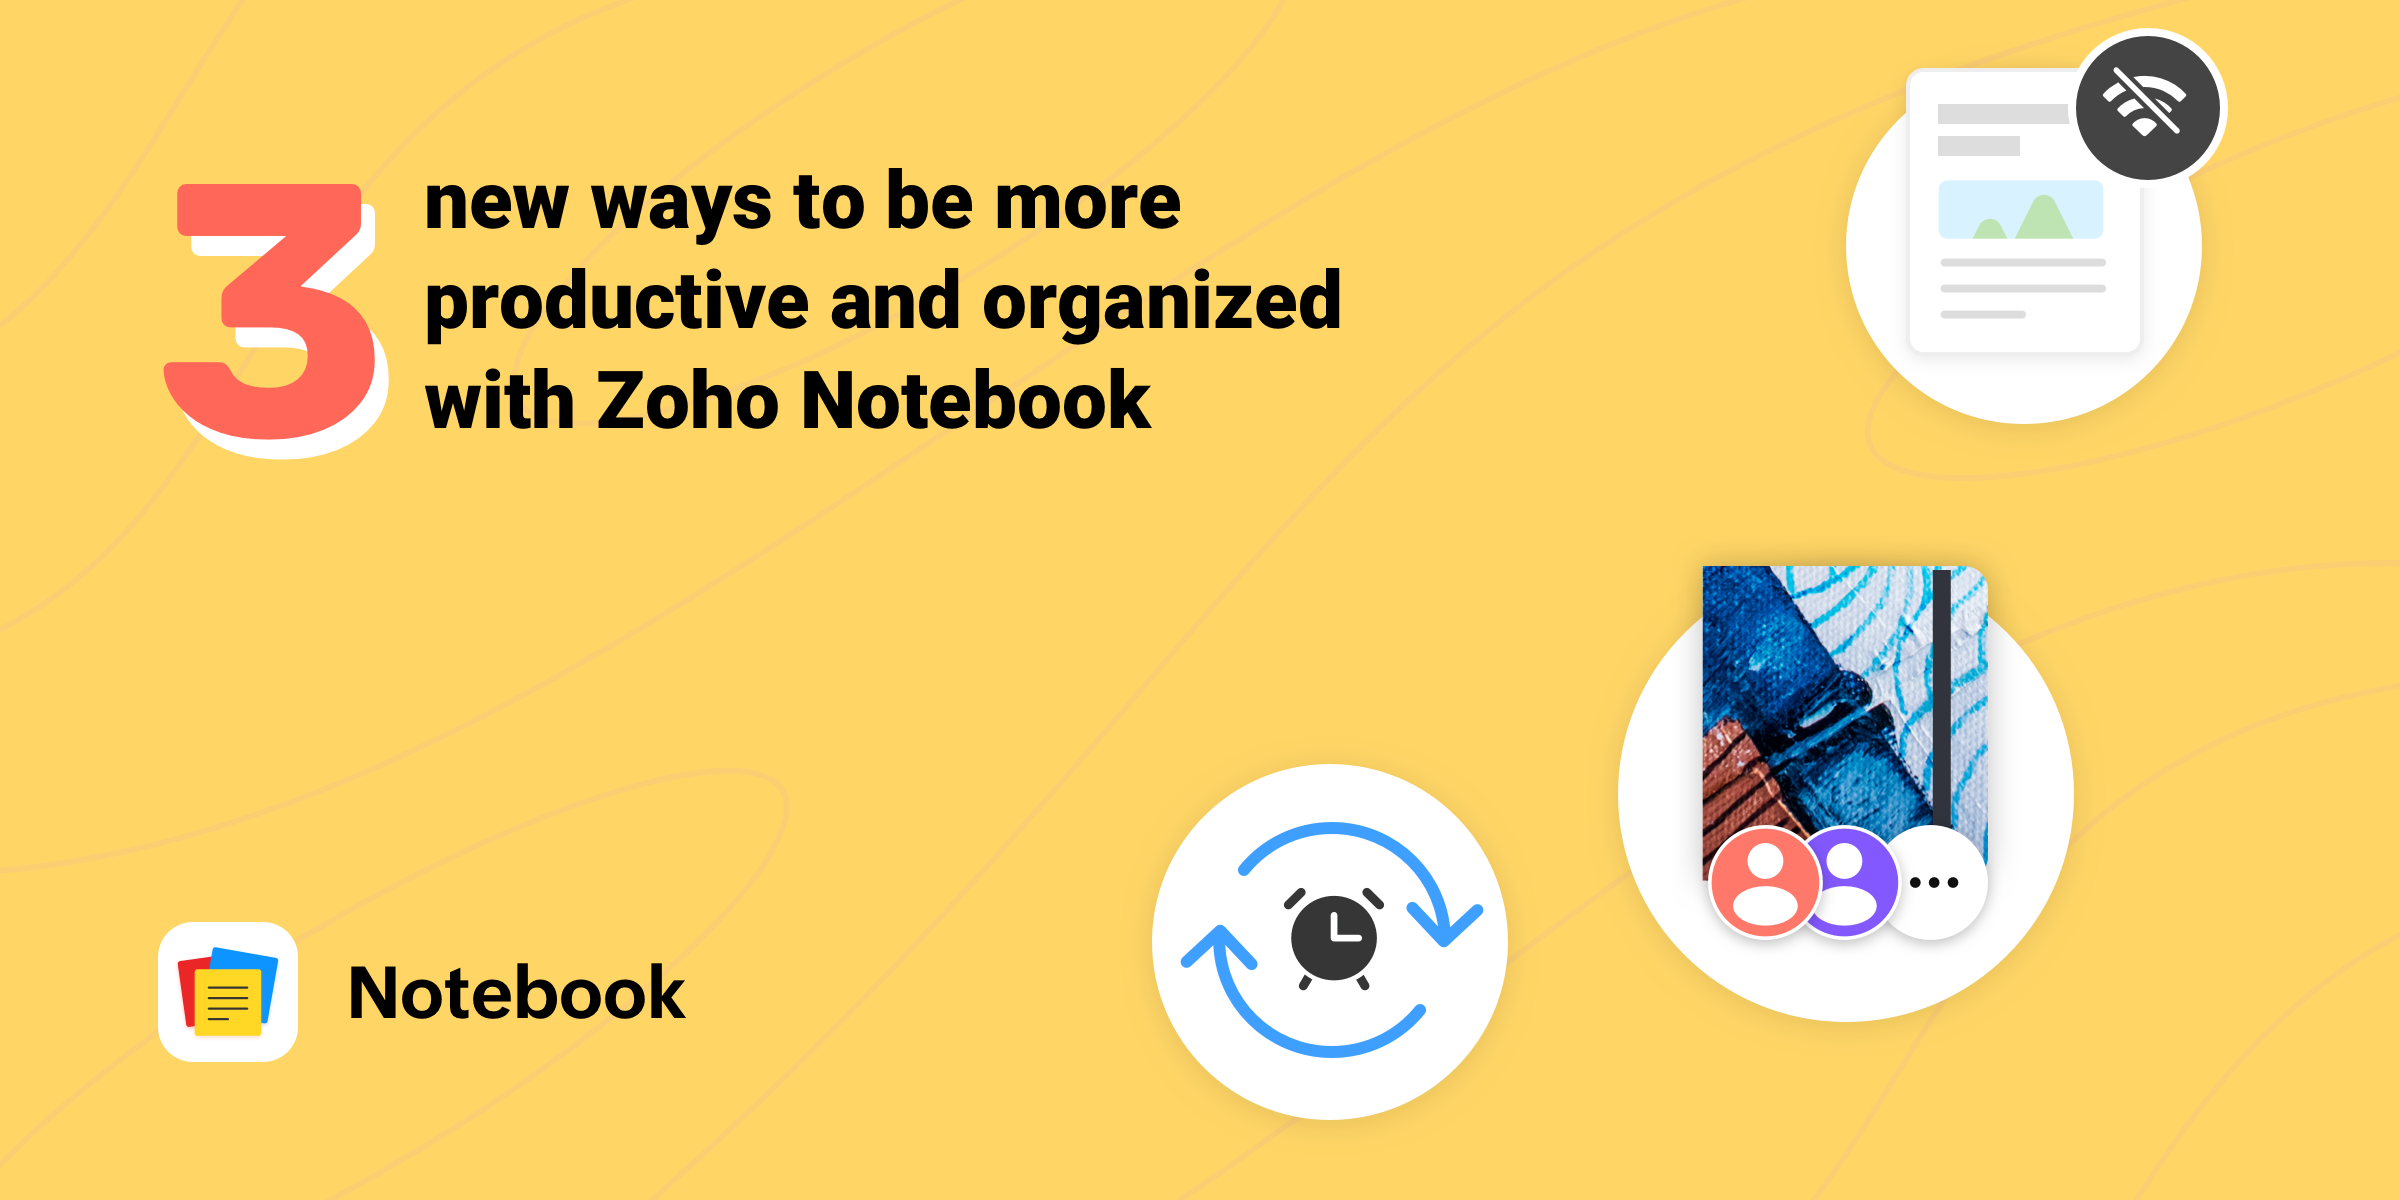 3 new ways to be more productive and organized with Zoho Notebook